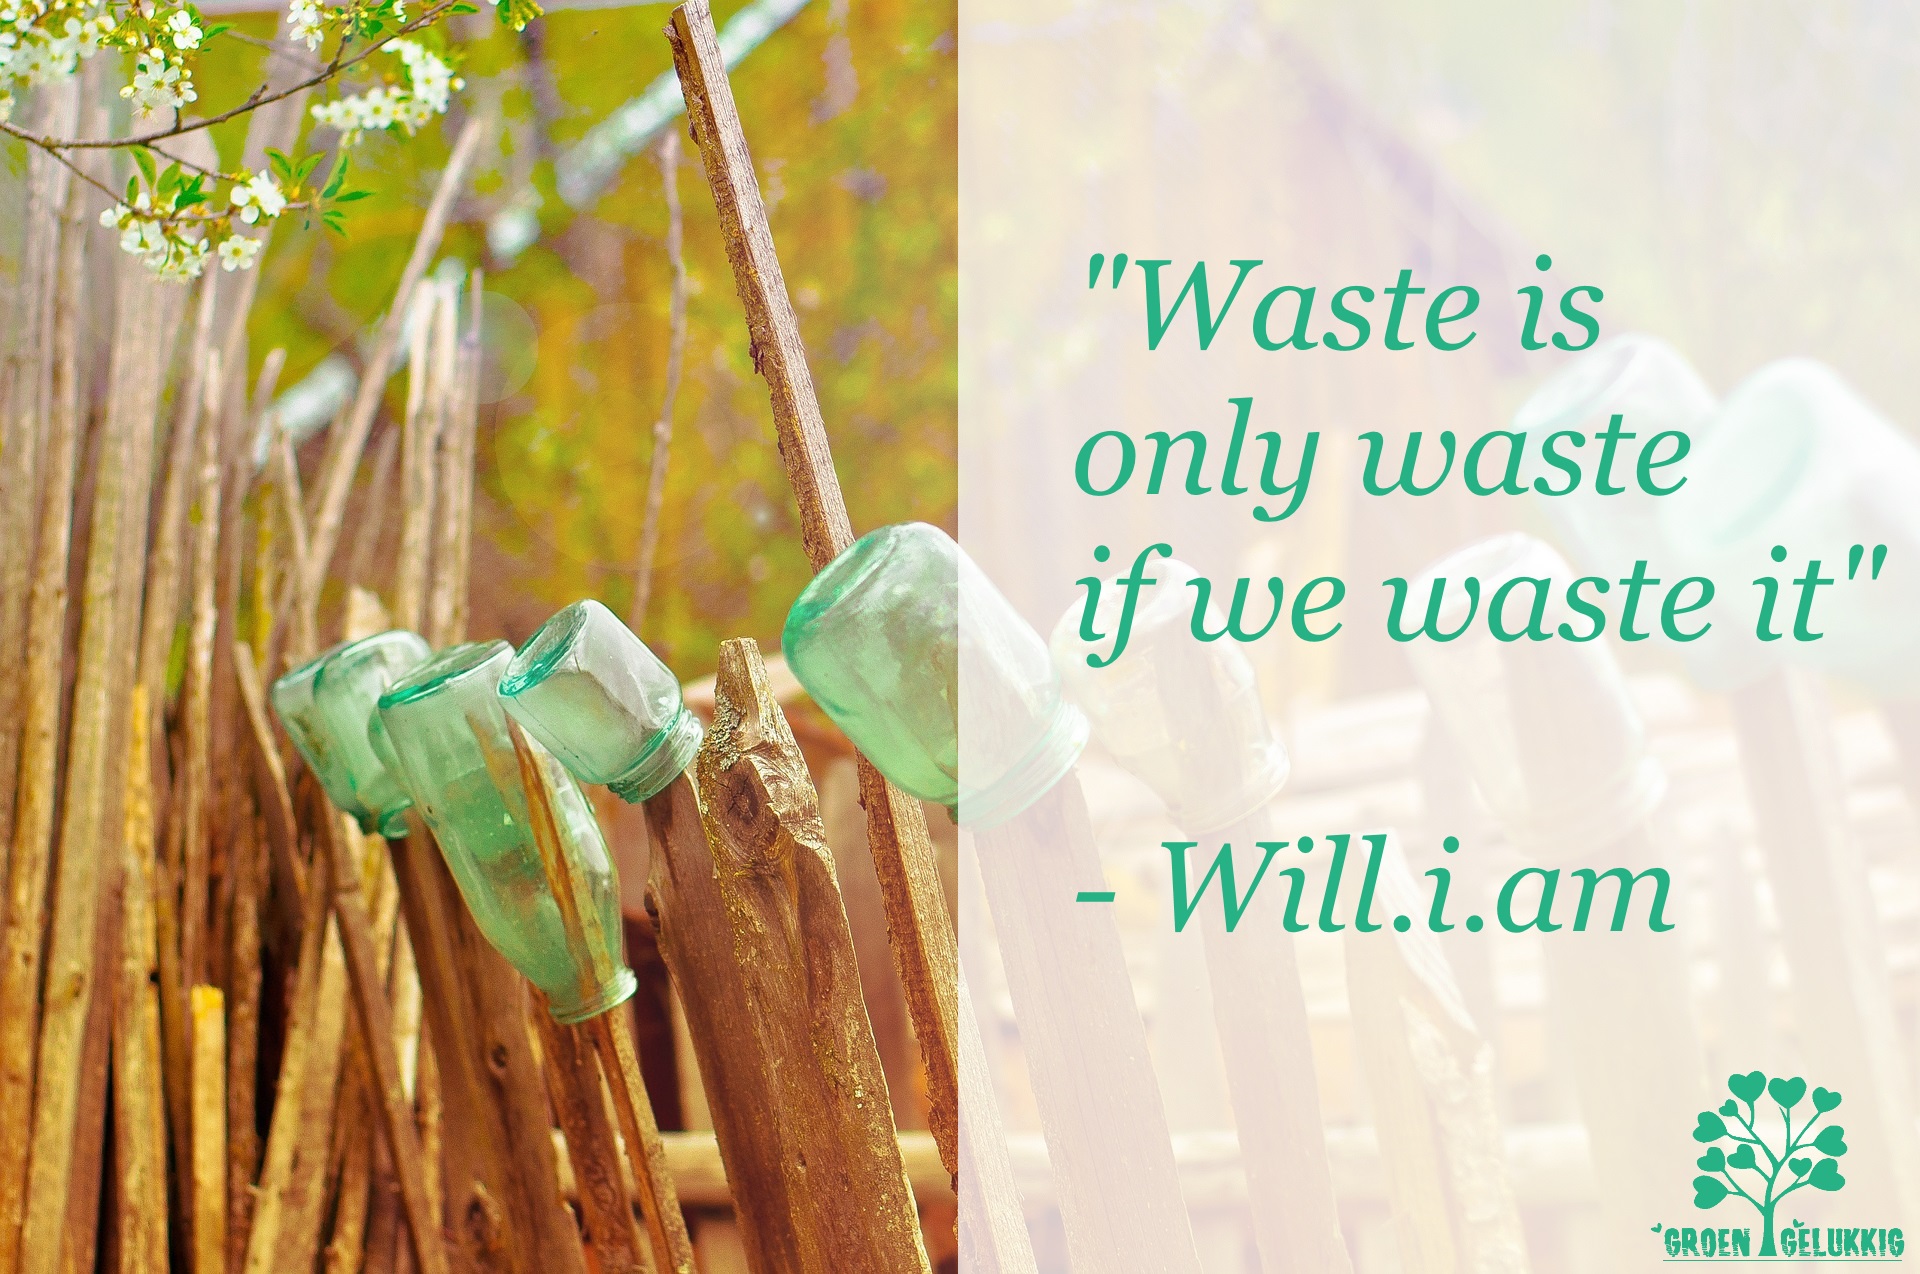 Waste is only waste if we waste it